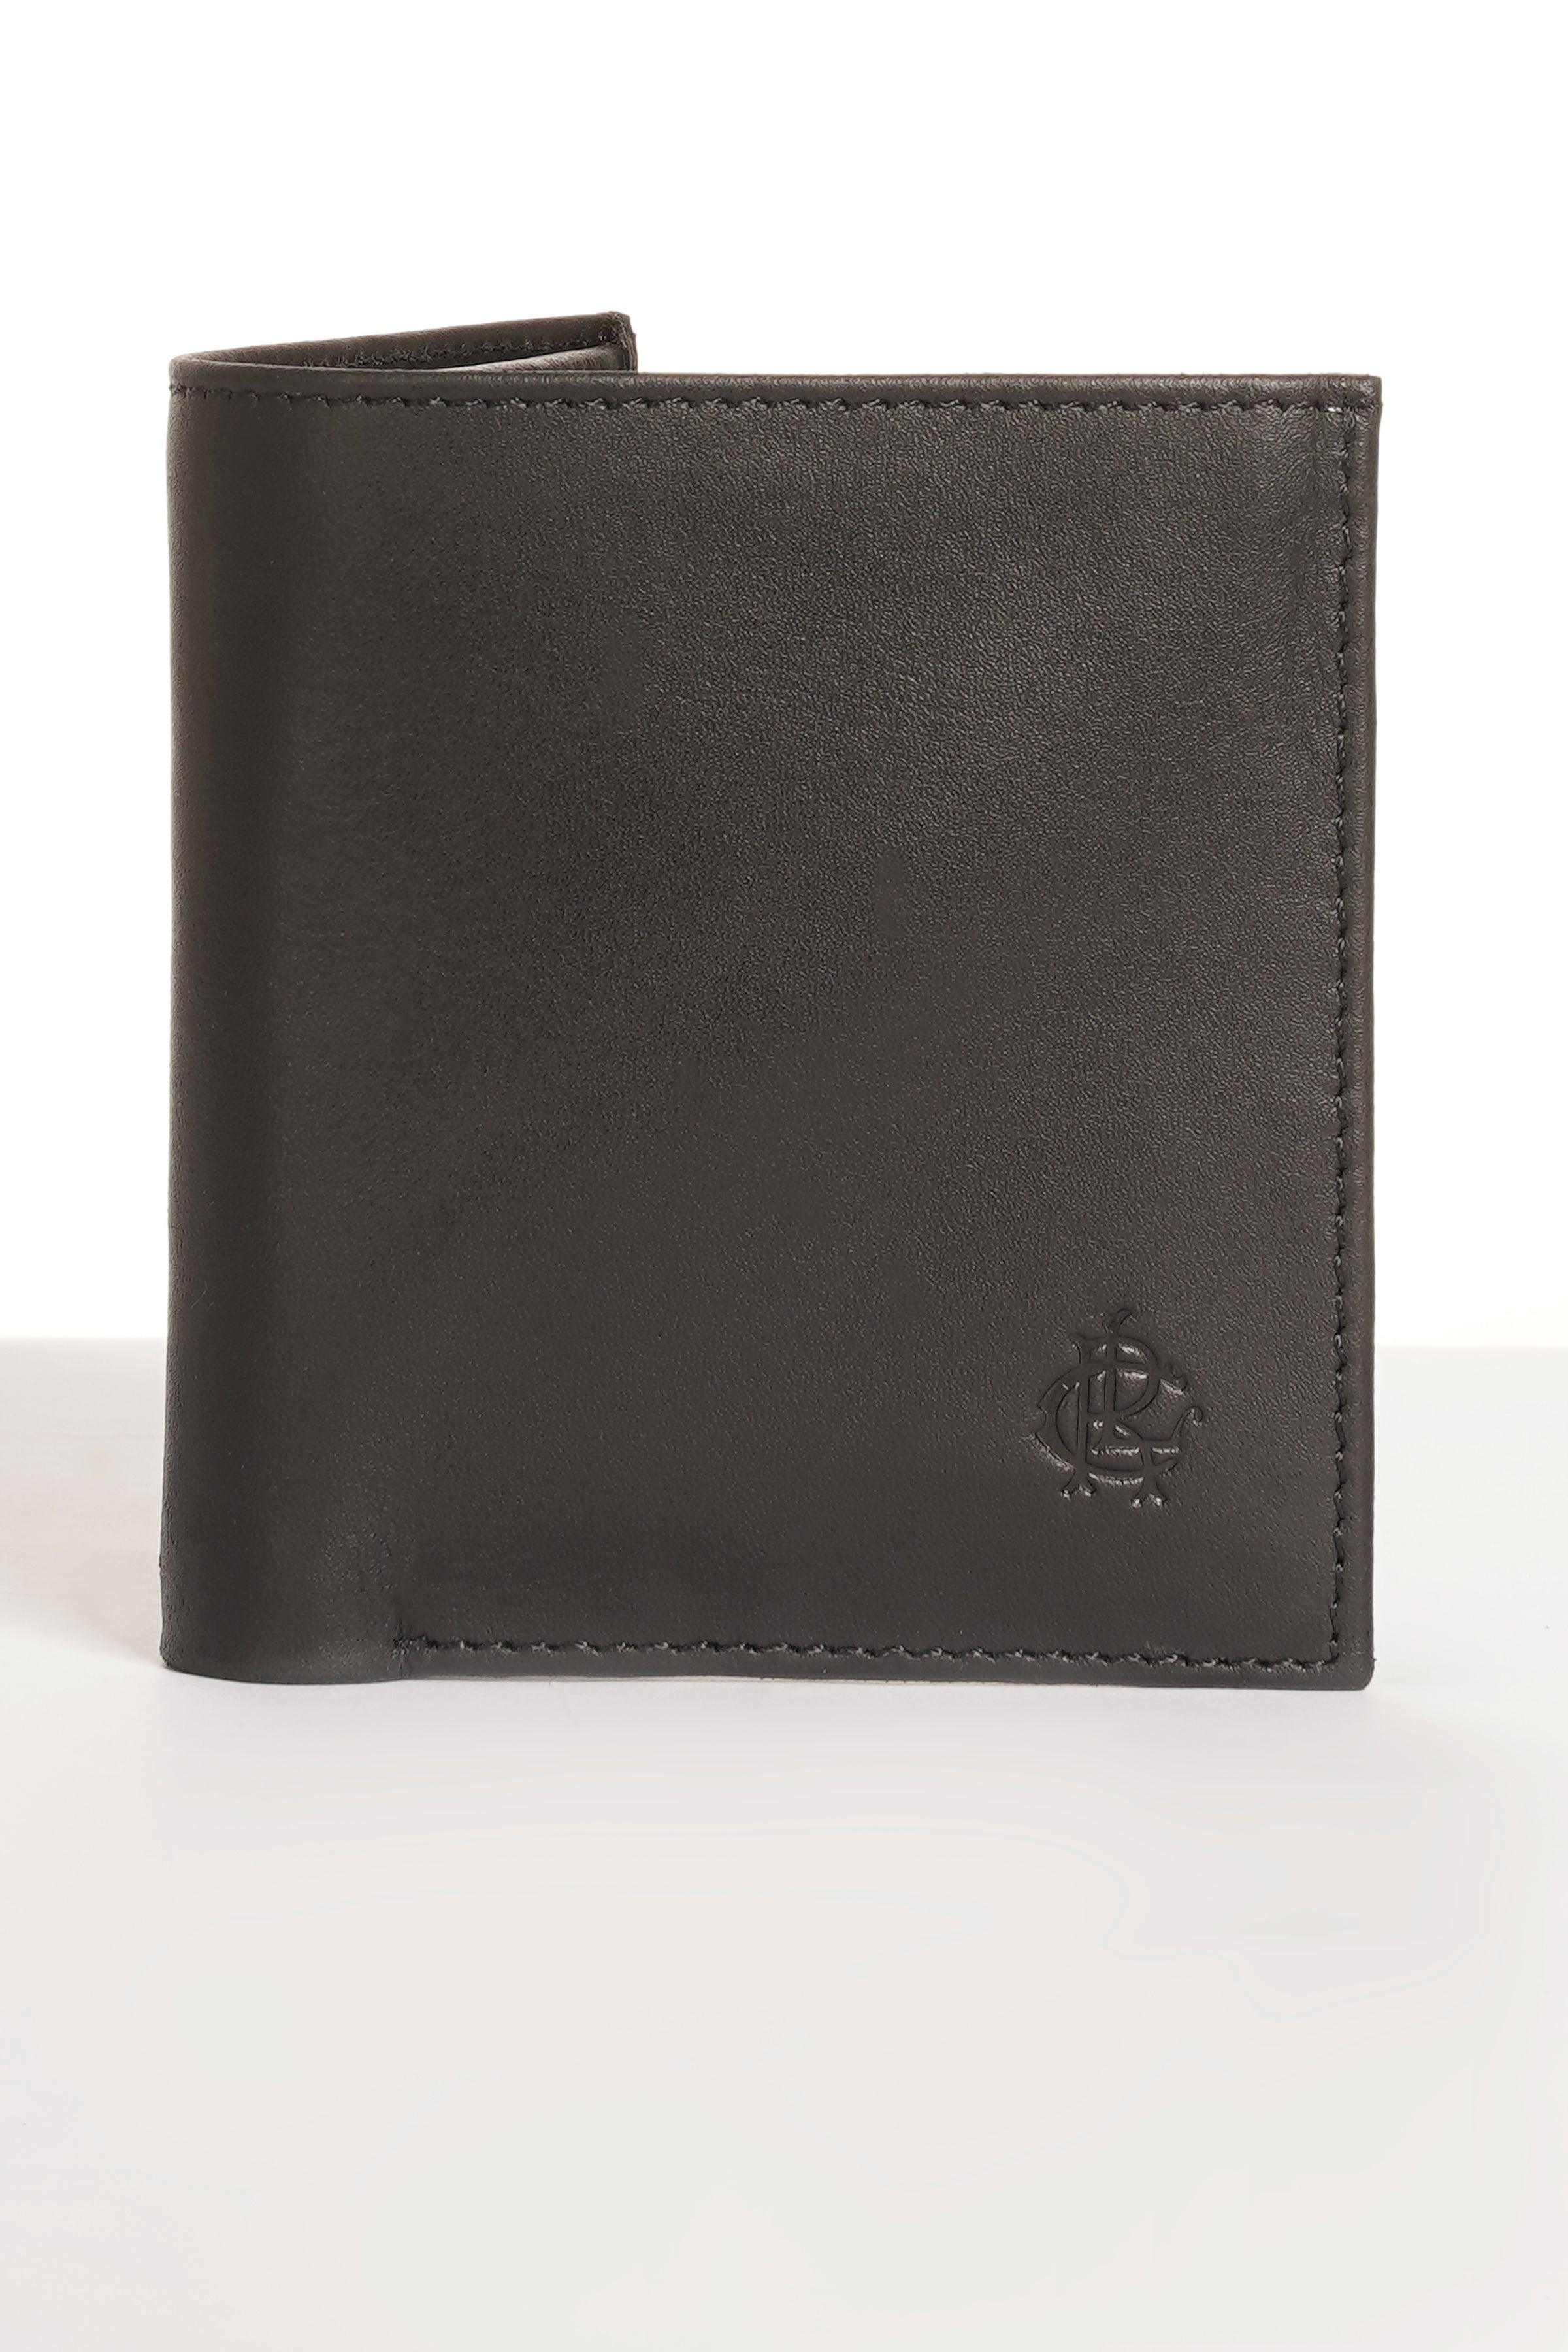 Buy Woodland Men tan Leather Wallet Online @ ₹399 from ShopClues